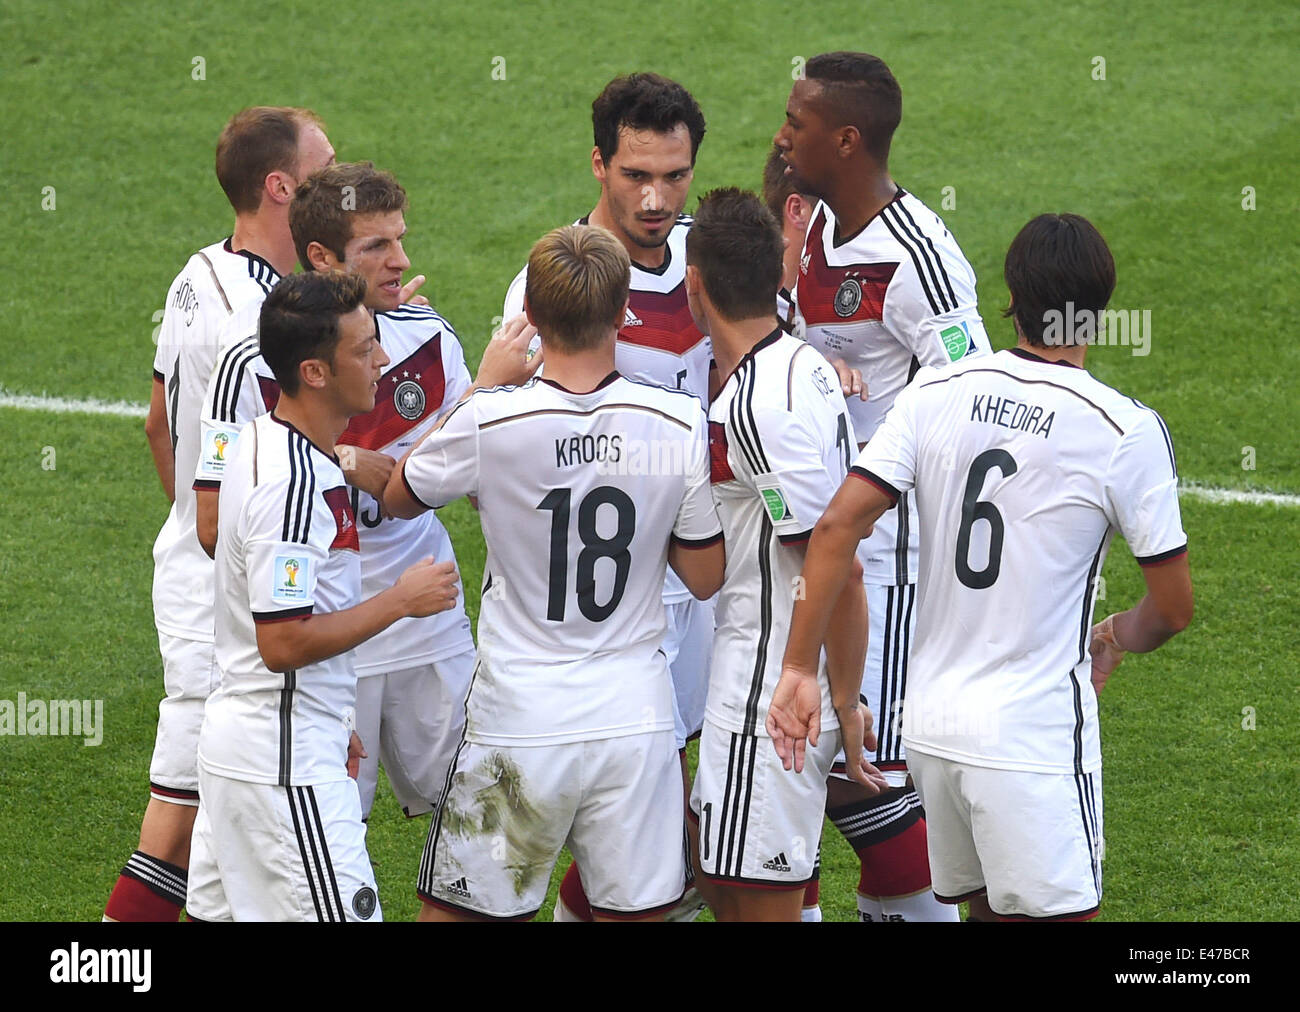 Rio de Janeiro, Brazil. 04th July, 2014. Mats Hummels (C) of Germany celebrates with team mates after scoring 0-1 goal during the FIFA World Cup 2014 quarter final soccer match between France and Germany at Estadio do Maracana in Rio de Janeiro, Brazil, 04 July 2014. Photo: Marcus Brandt/dpa/Alamy Live News Stock Photo